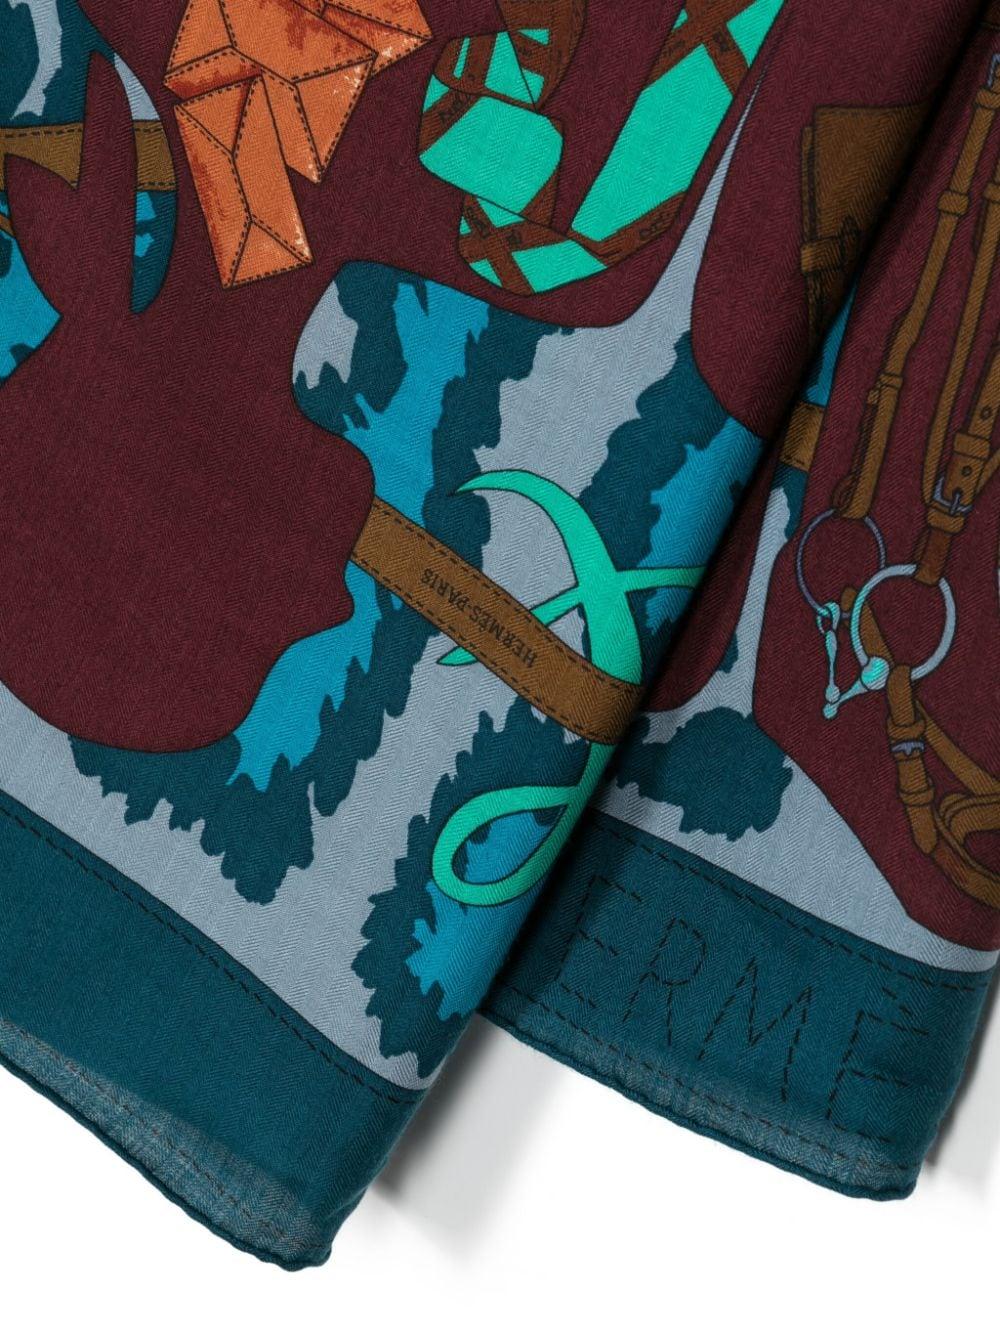 Discover the artful craftsmanship that goes into making a luxurious Hermès scarf. With a detailed creation process that takes over a year per design, each scarf is a masterpiece. With only twelve designs released per year, these scarves are truly